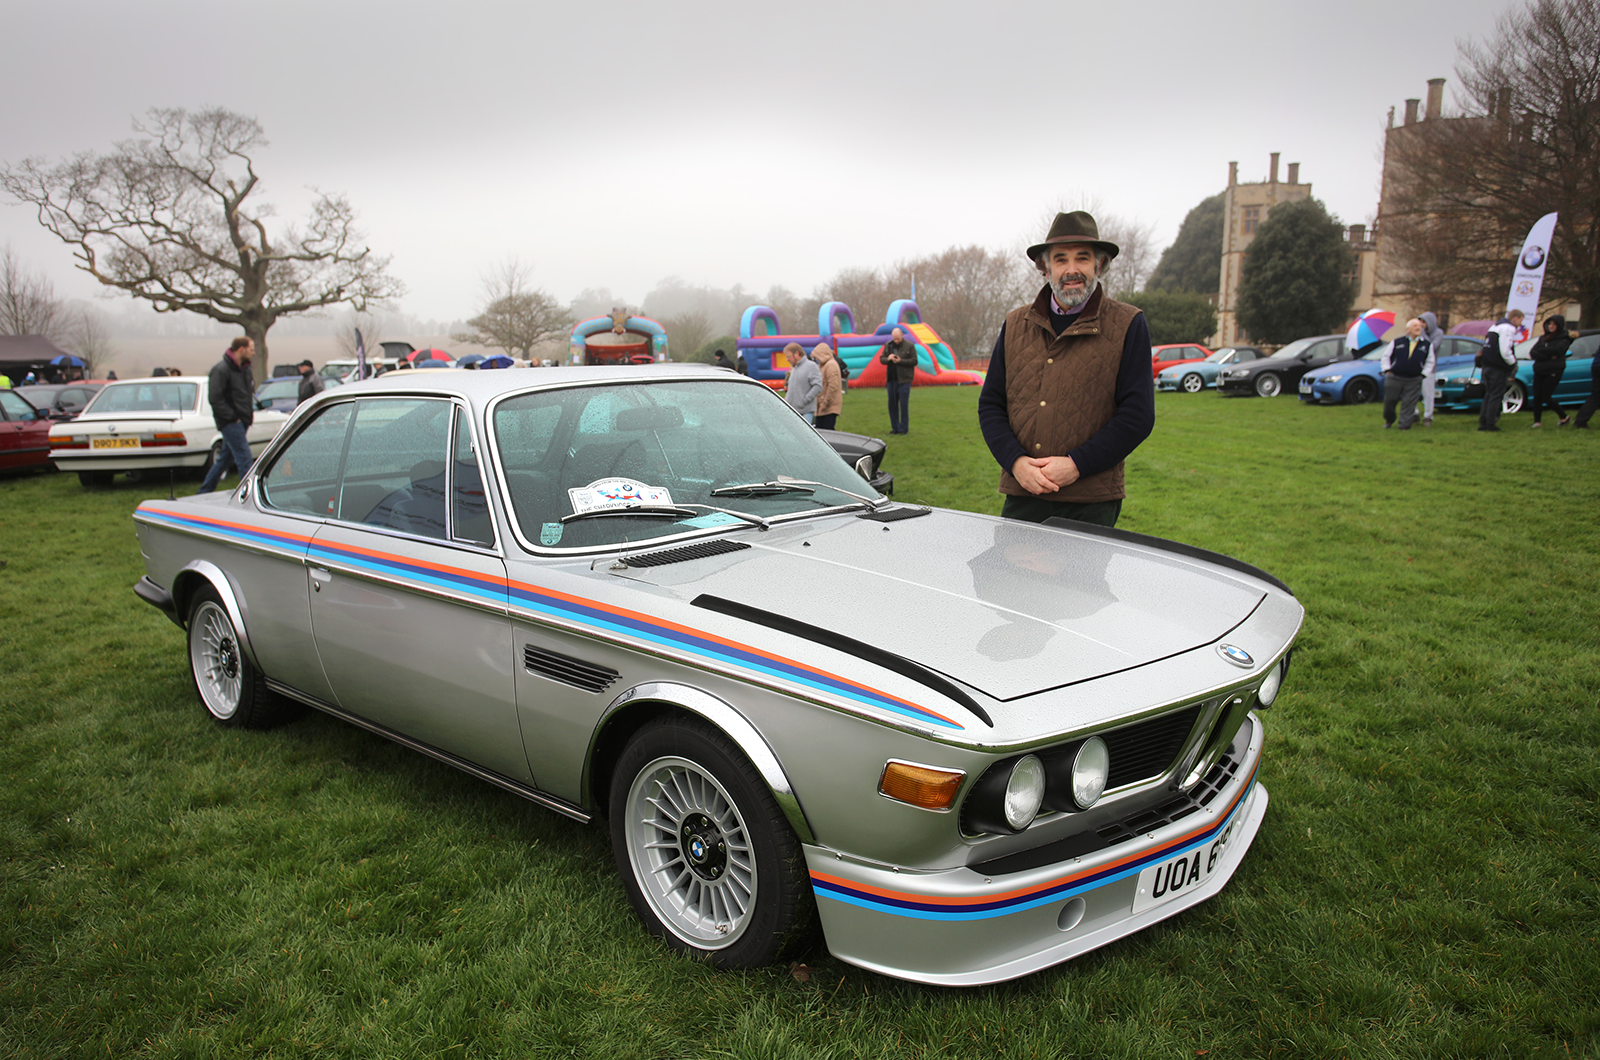 Sharknose Collection catches the eye at BMW Car Club's Southern Concours